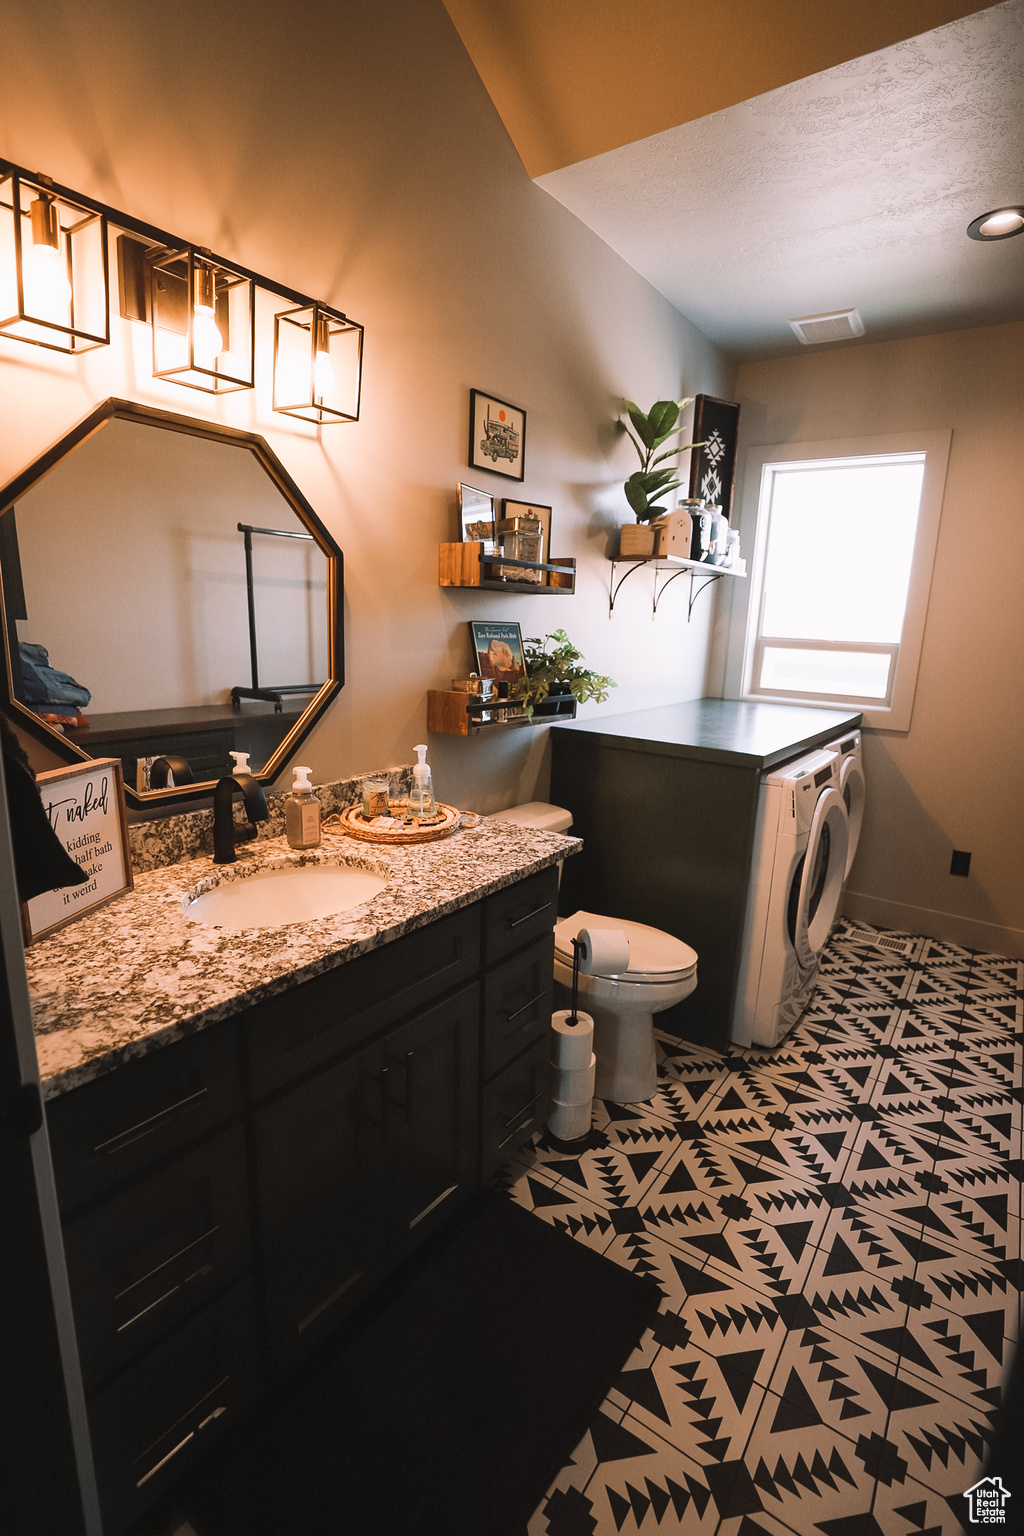 Laundry room/Half Bathroom featuring oversized vanity, toilet, washer / clothes dryer, tile flooring, and a textured ceiling